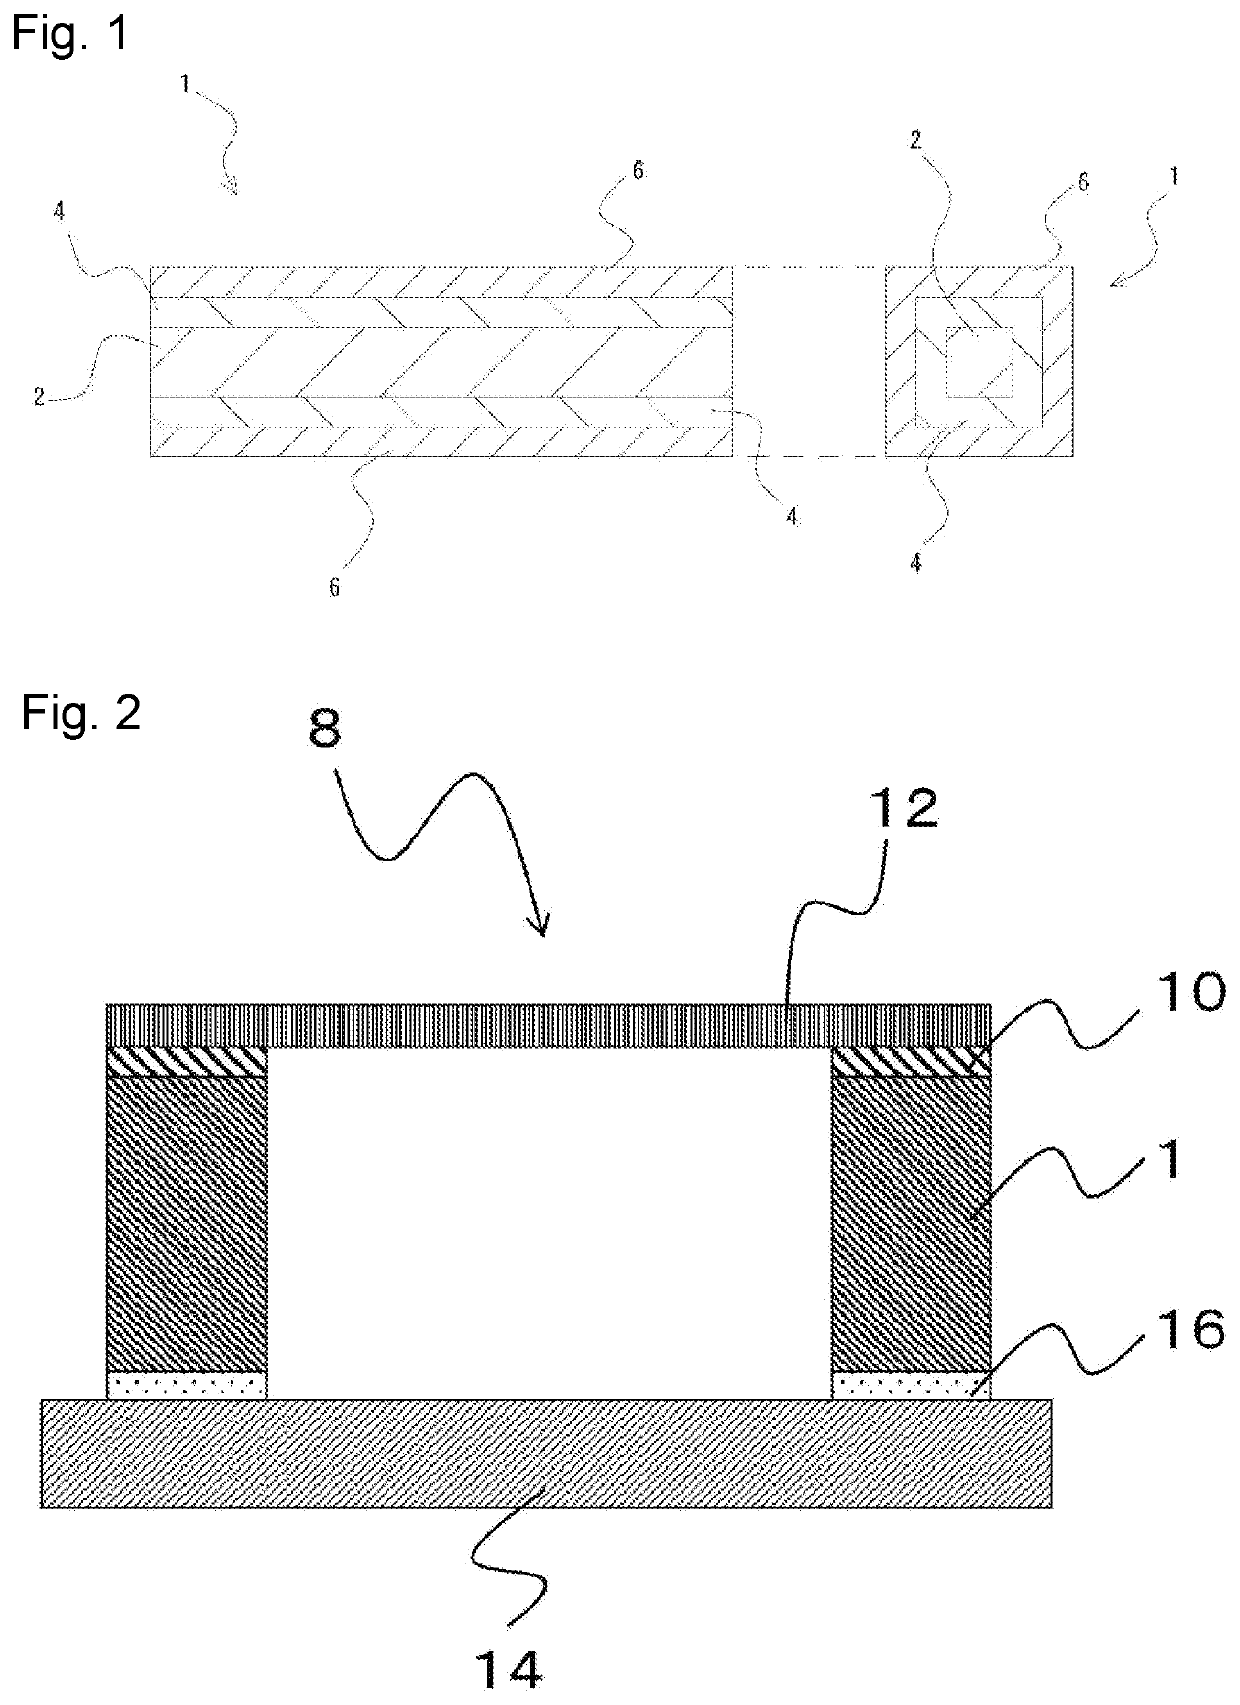 Support frame for pellicles, pellicle, and method for manufacturing same